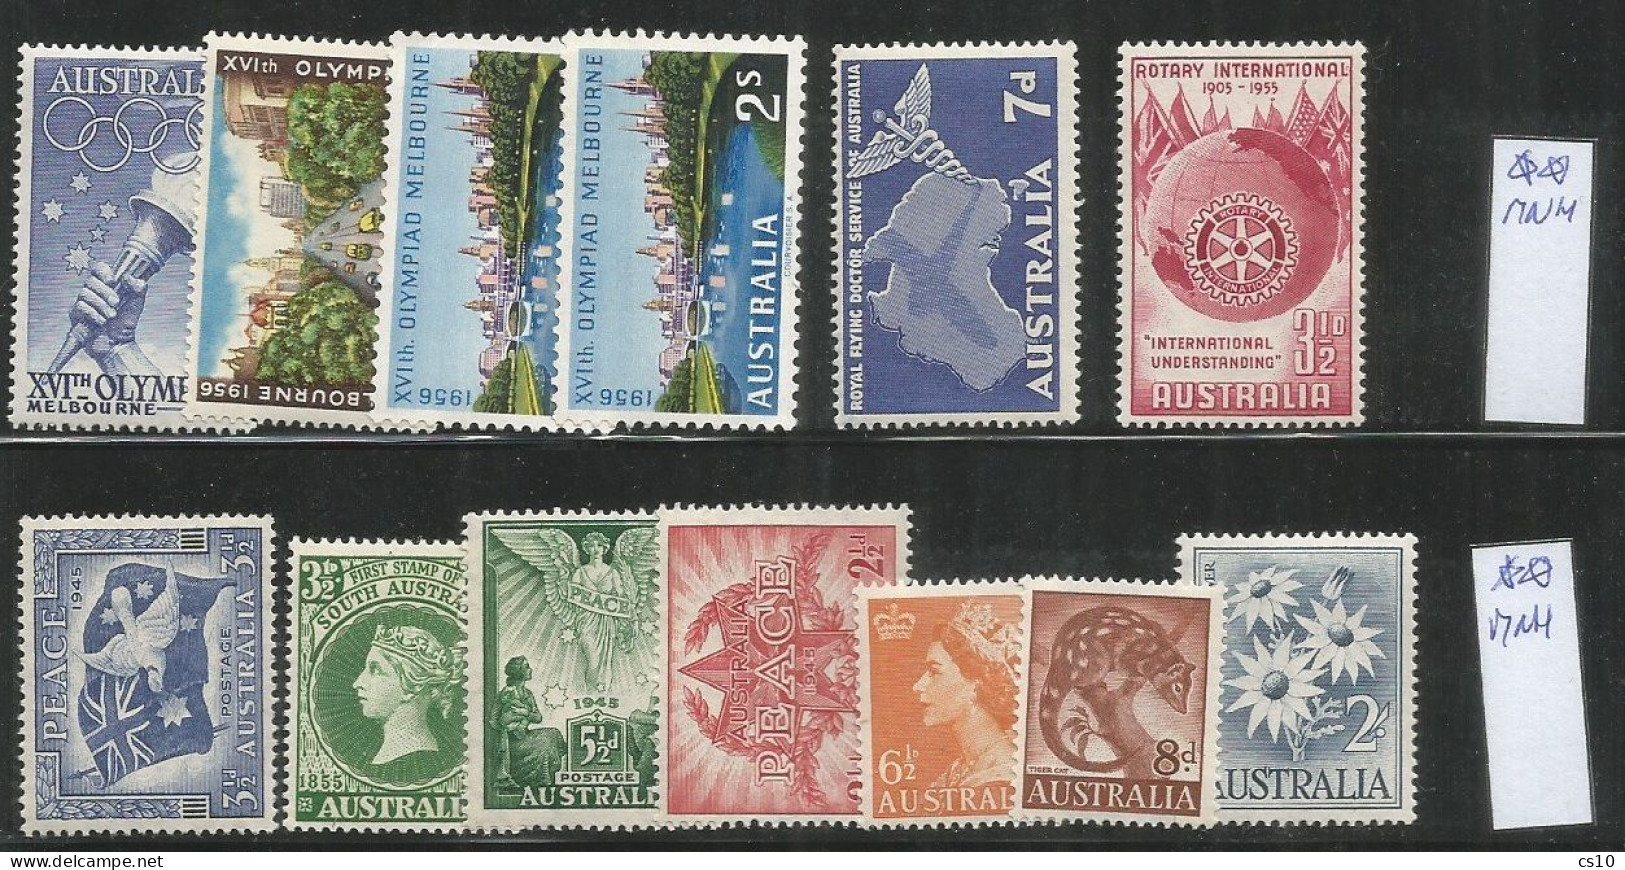 OLD Australia & States KG5 Head Kangaroos Study lot # 800+ good used pcs, some on-piece Perfins OS P.Due Fiscals